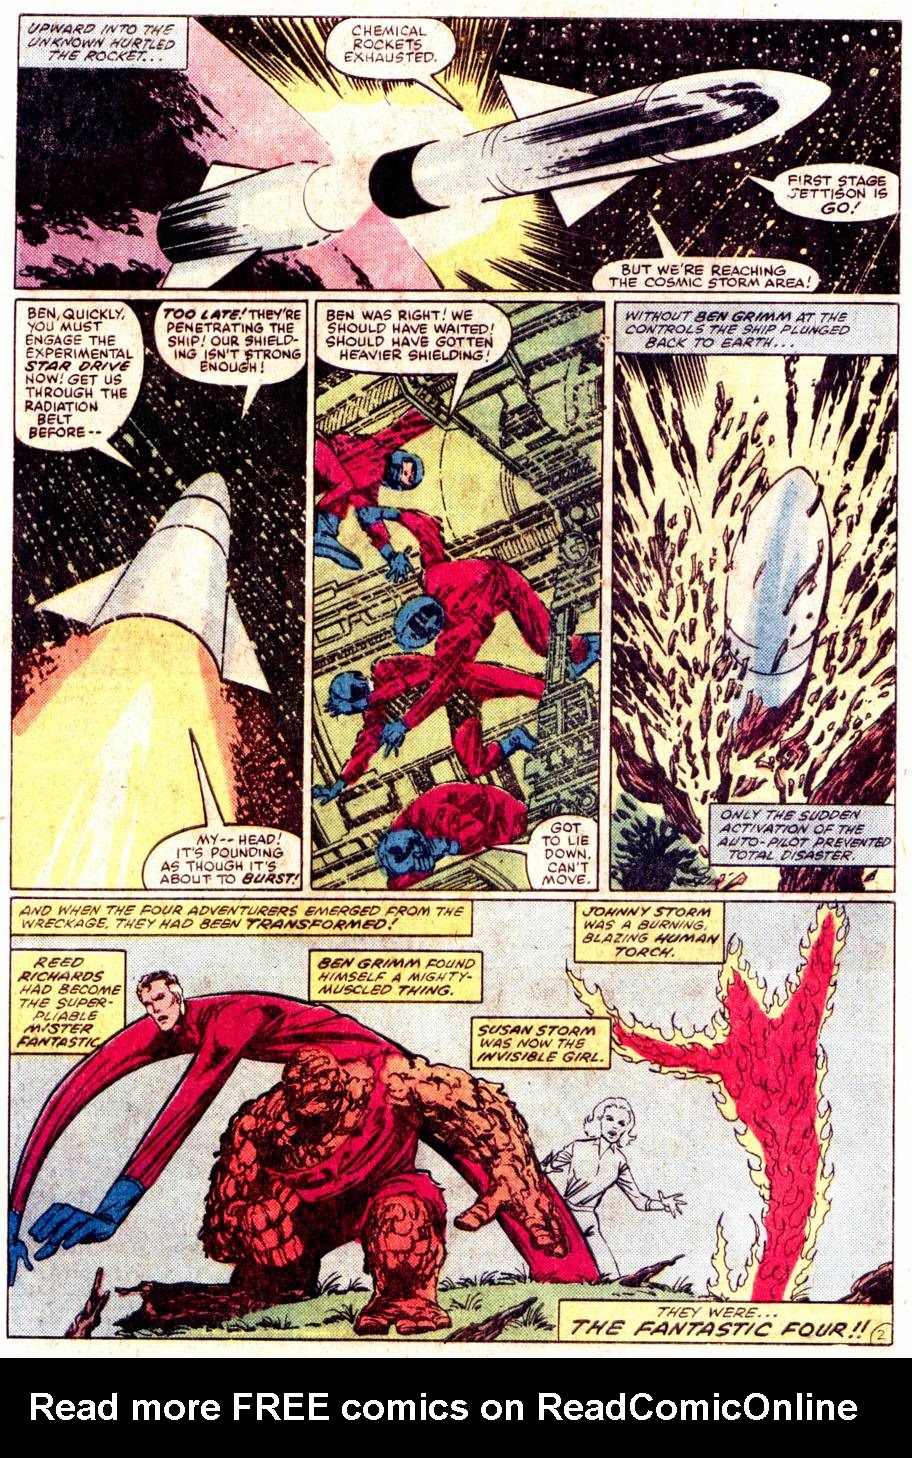 <{ $series->title }} issue 36 - The Fantastic Four Had Not Gained Their Powers - Page 3